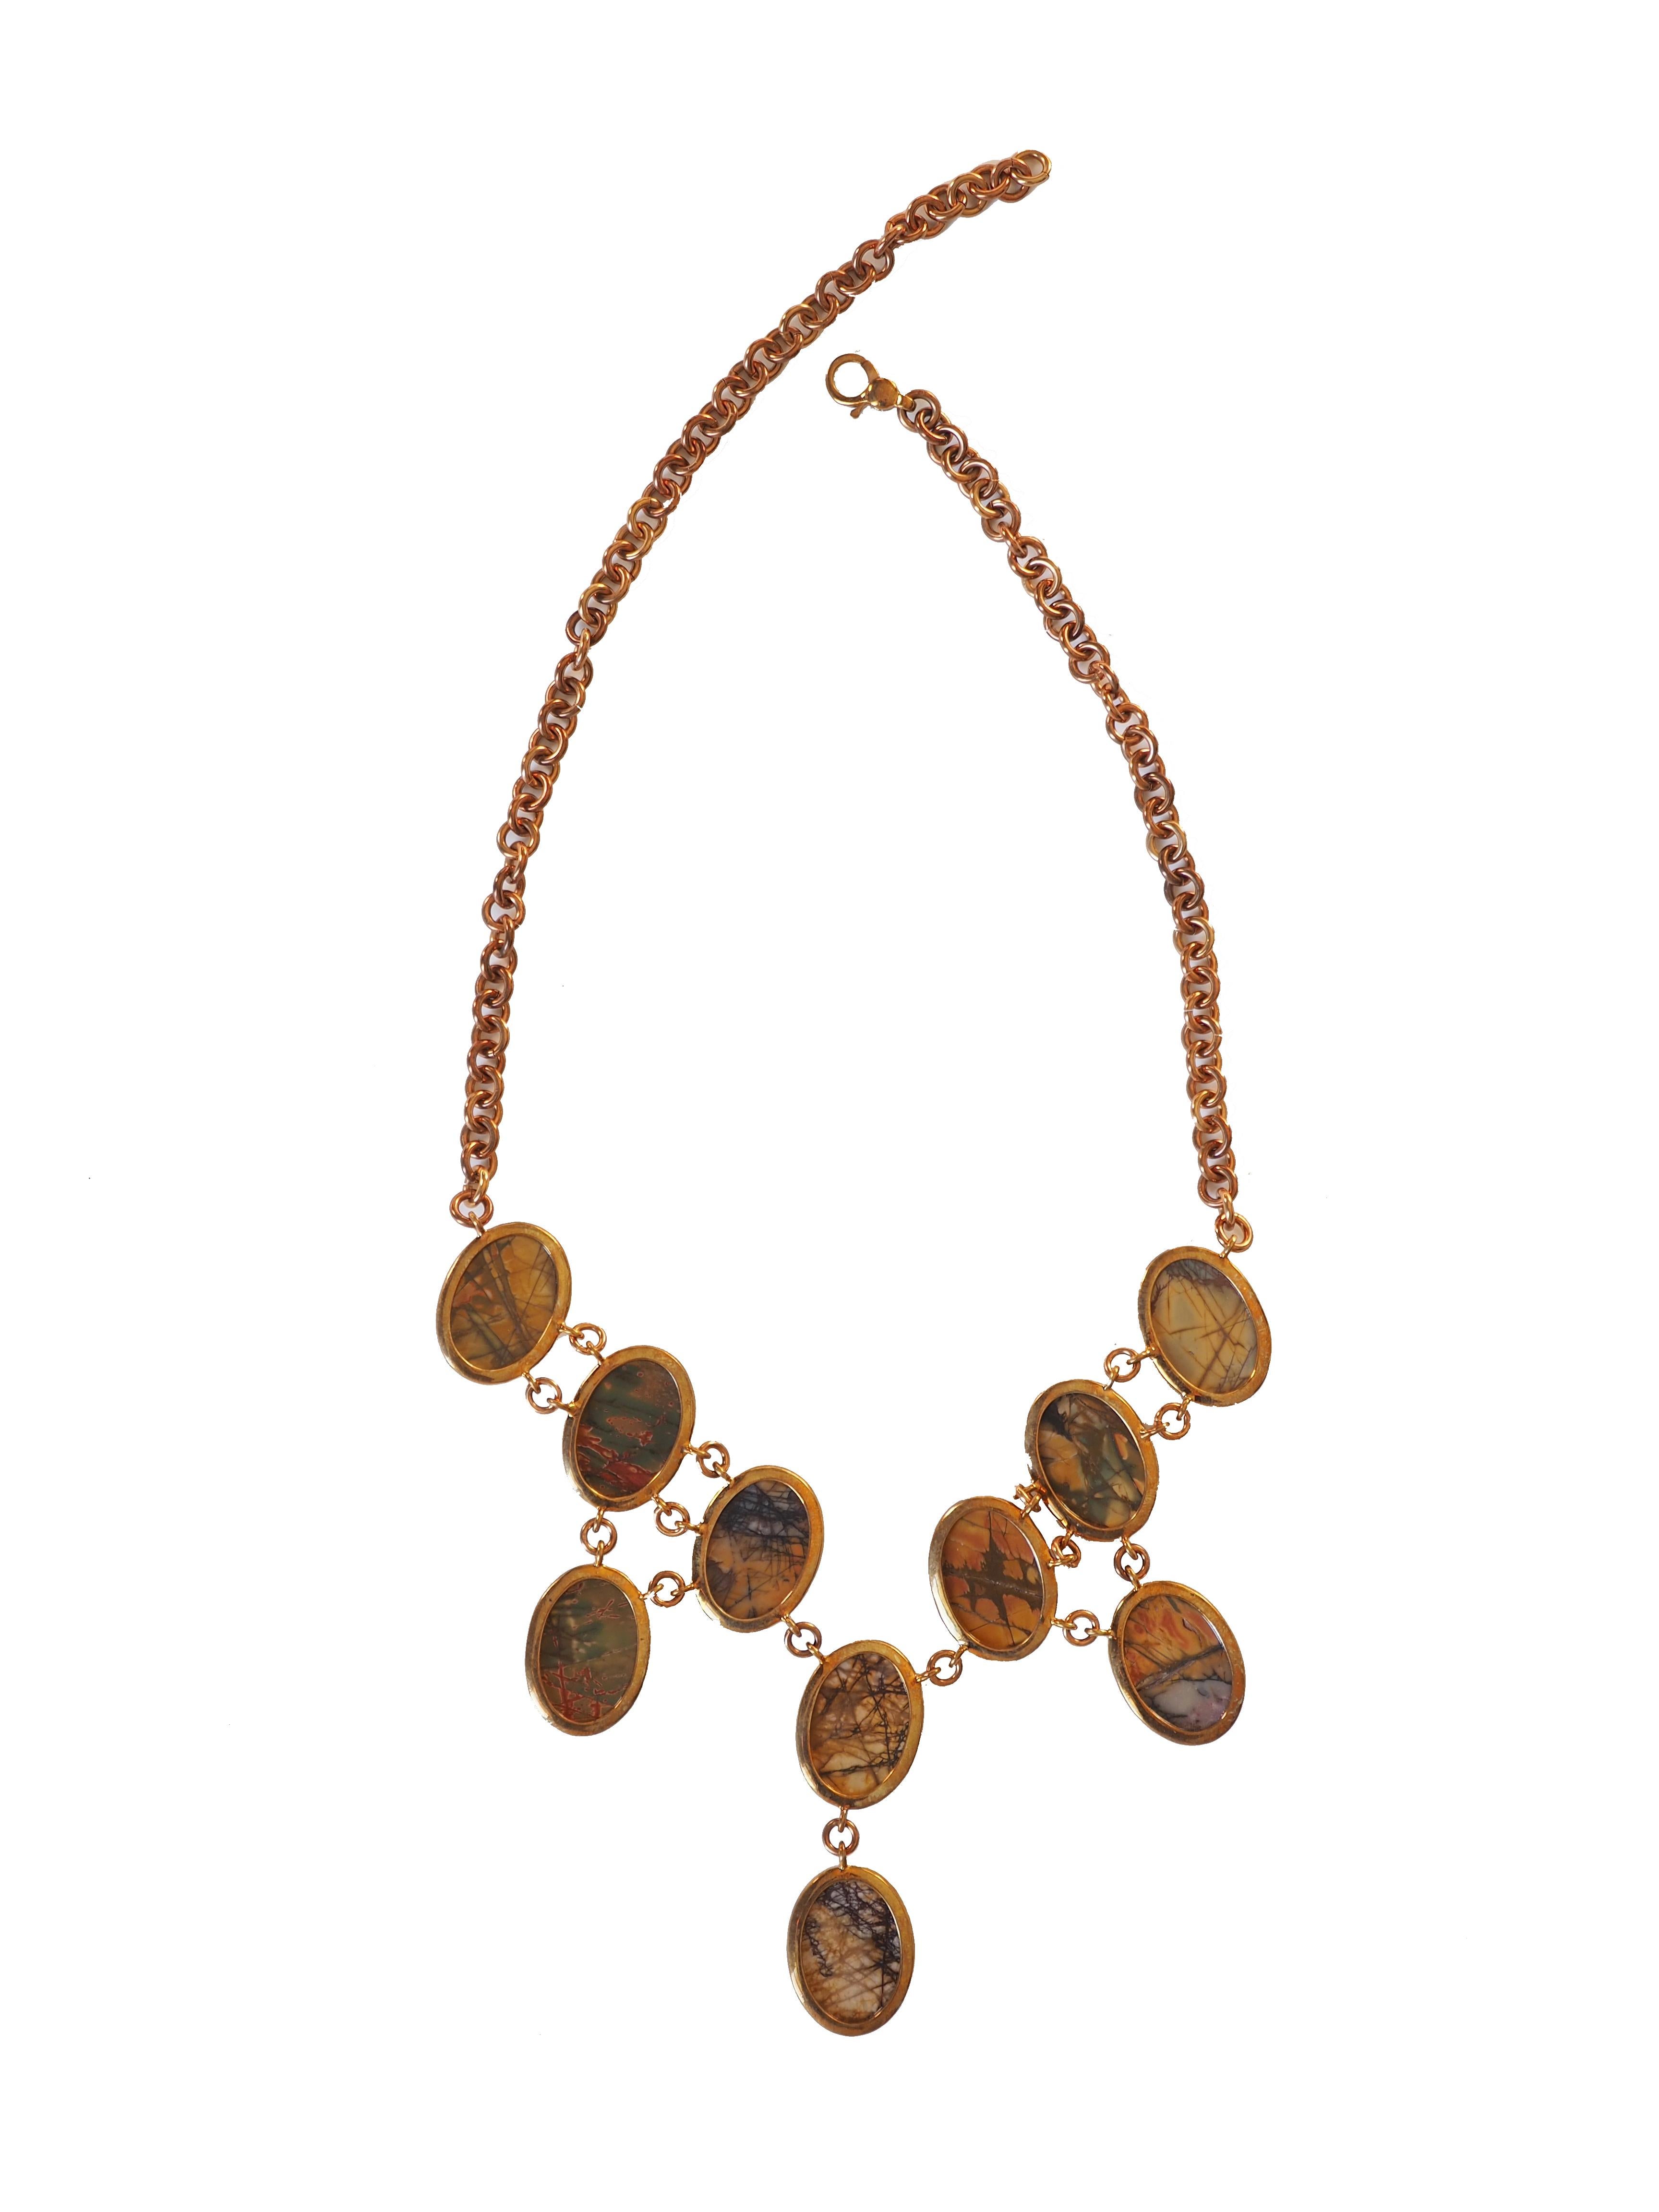 Hand made picasso  cabochon jasper necklace, adjustable, linked in bronze.
All Giulia Colussi jewelry is new and has never been previously owned or worn. Each item will arrive at your door beautifully gift wrapped in our boxes, put inside an elegant